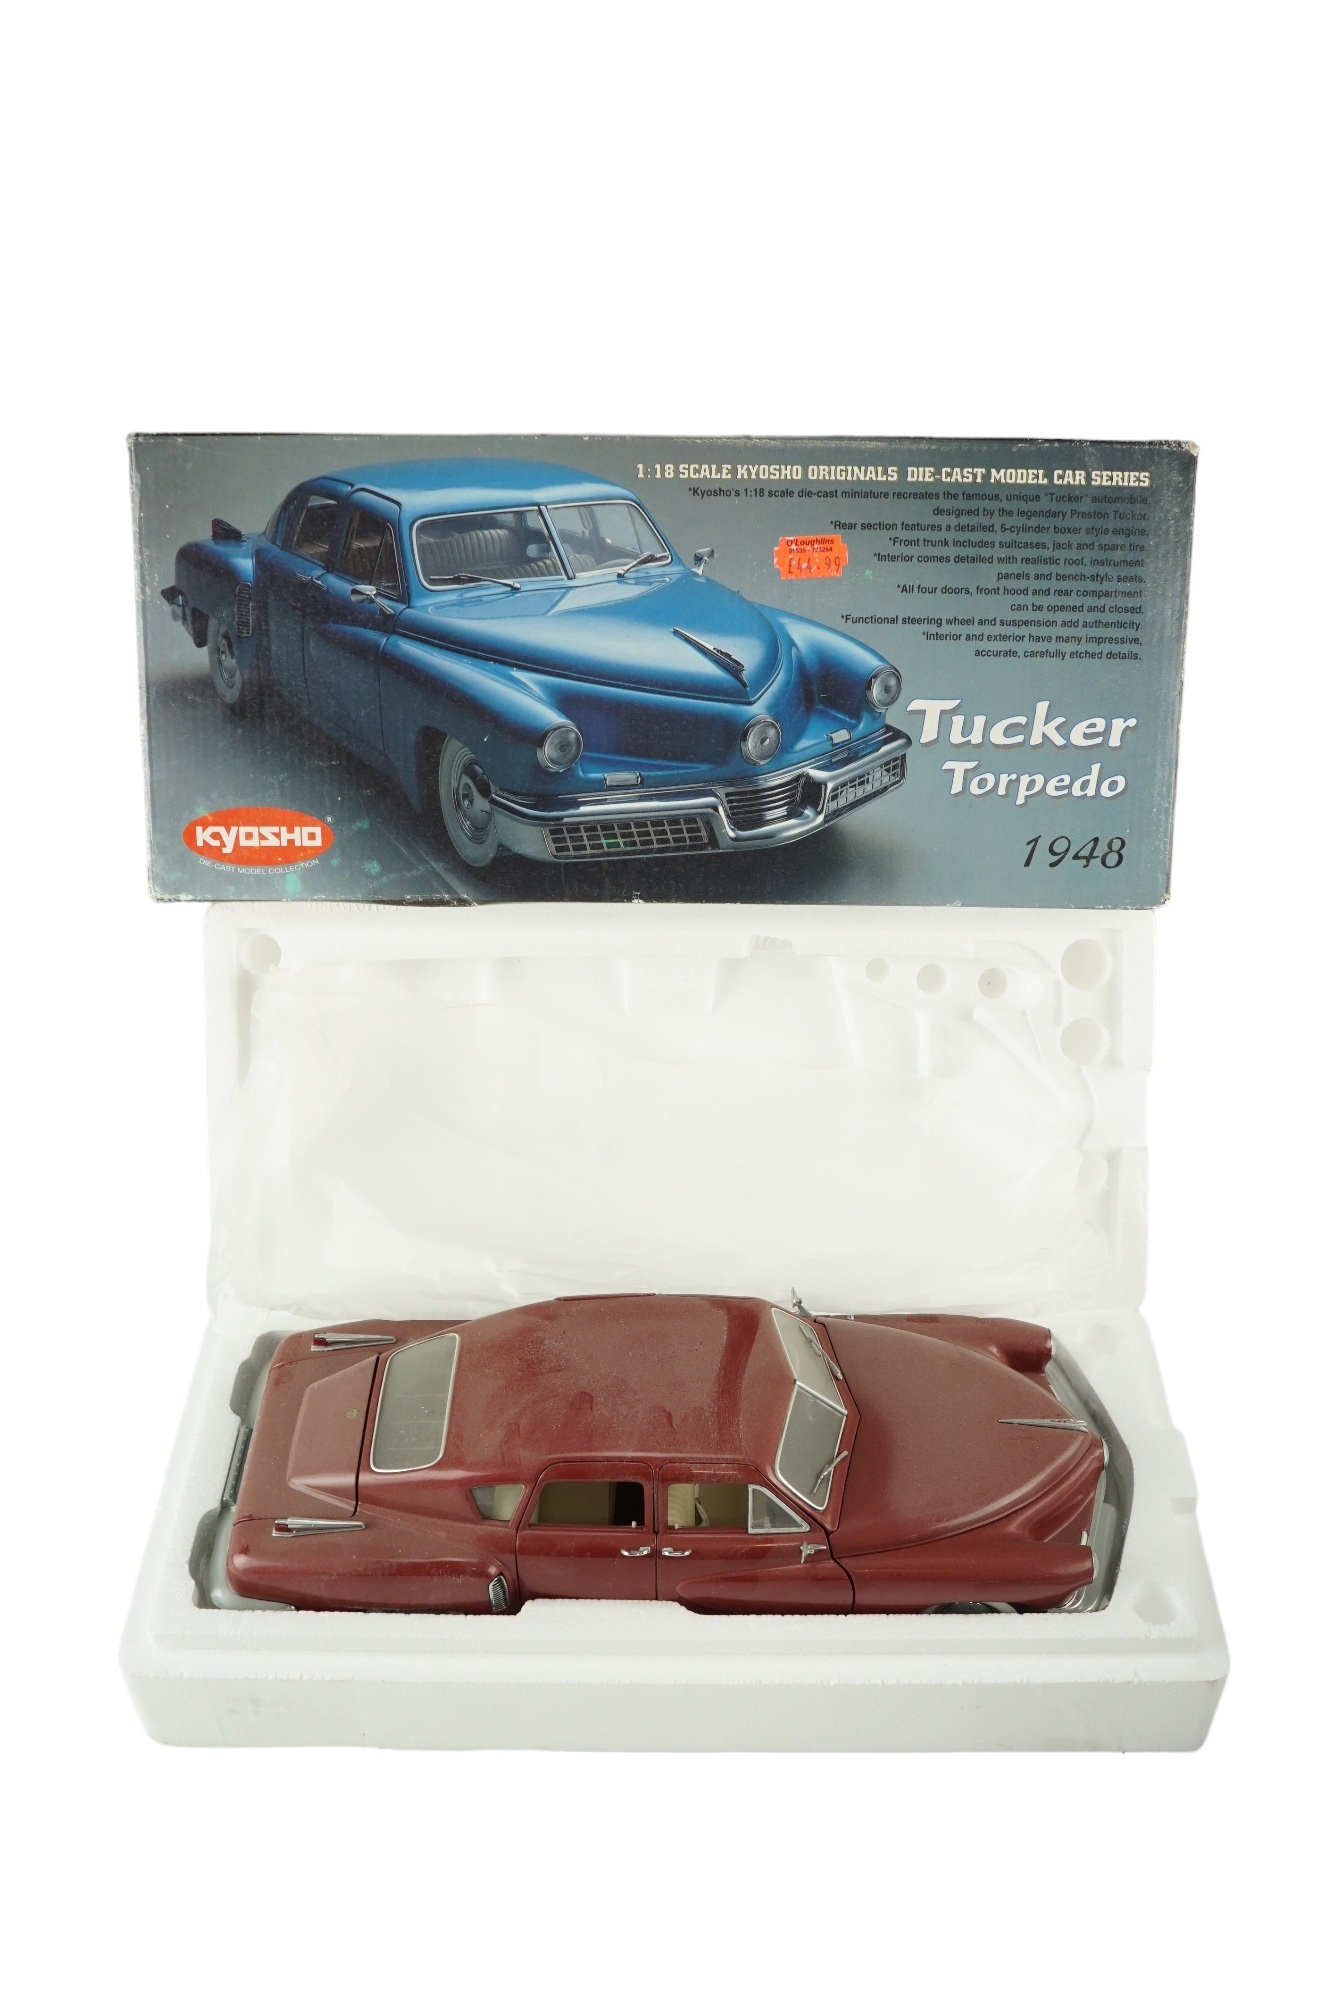 Two Kyosho diecast model cars comprising a BMW V12 LMR and a Tucker Torpedo 1848, 1:18 scale - Image 2 of 3